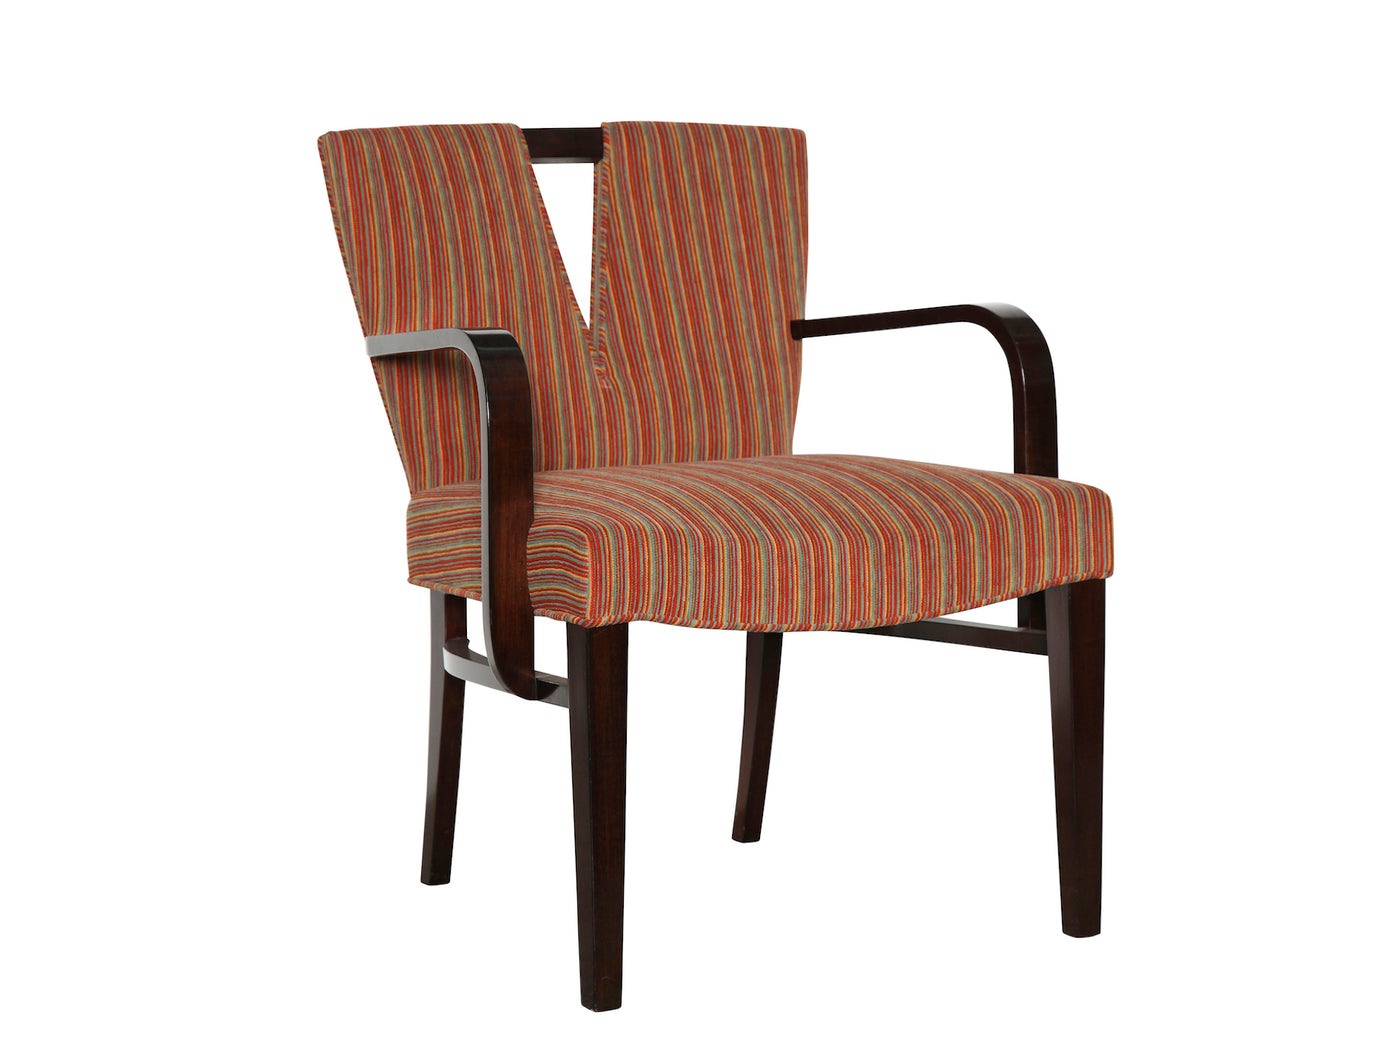 Open Arm Chair by Paul Frankl for Johnson Furniture